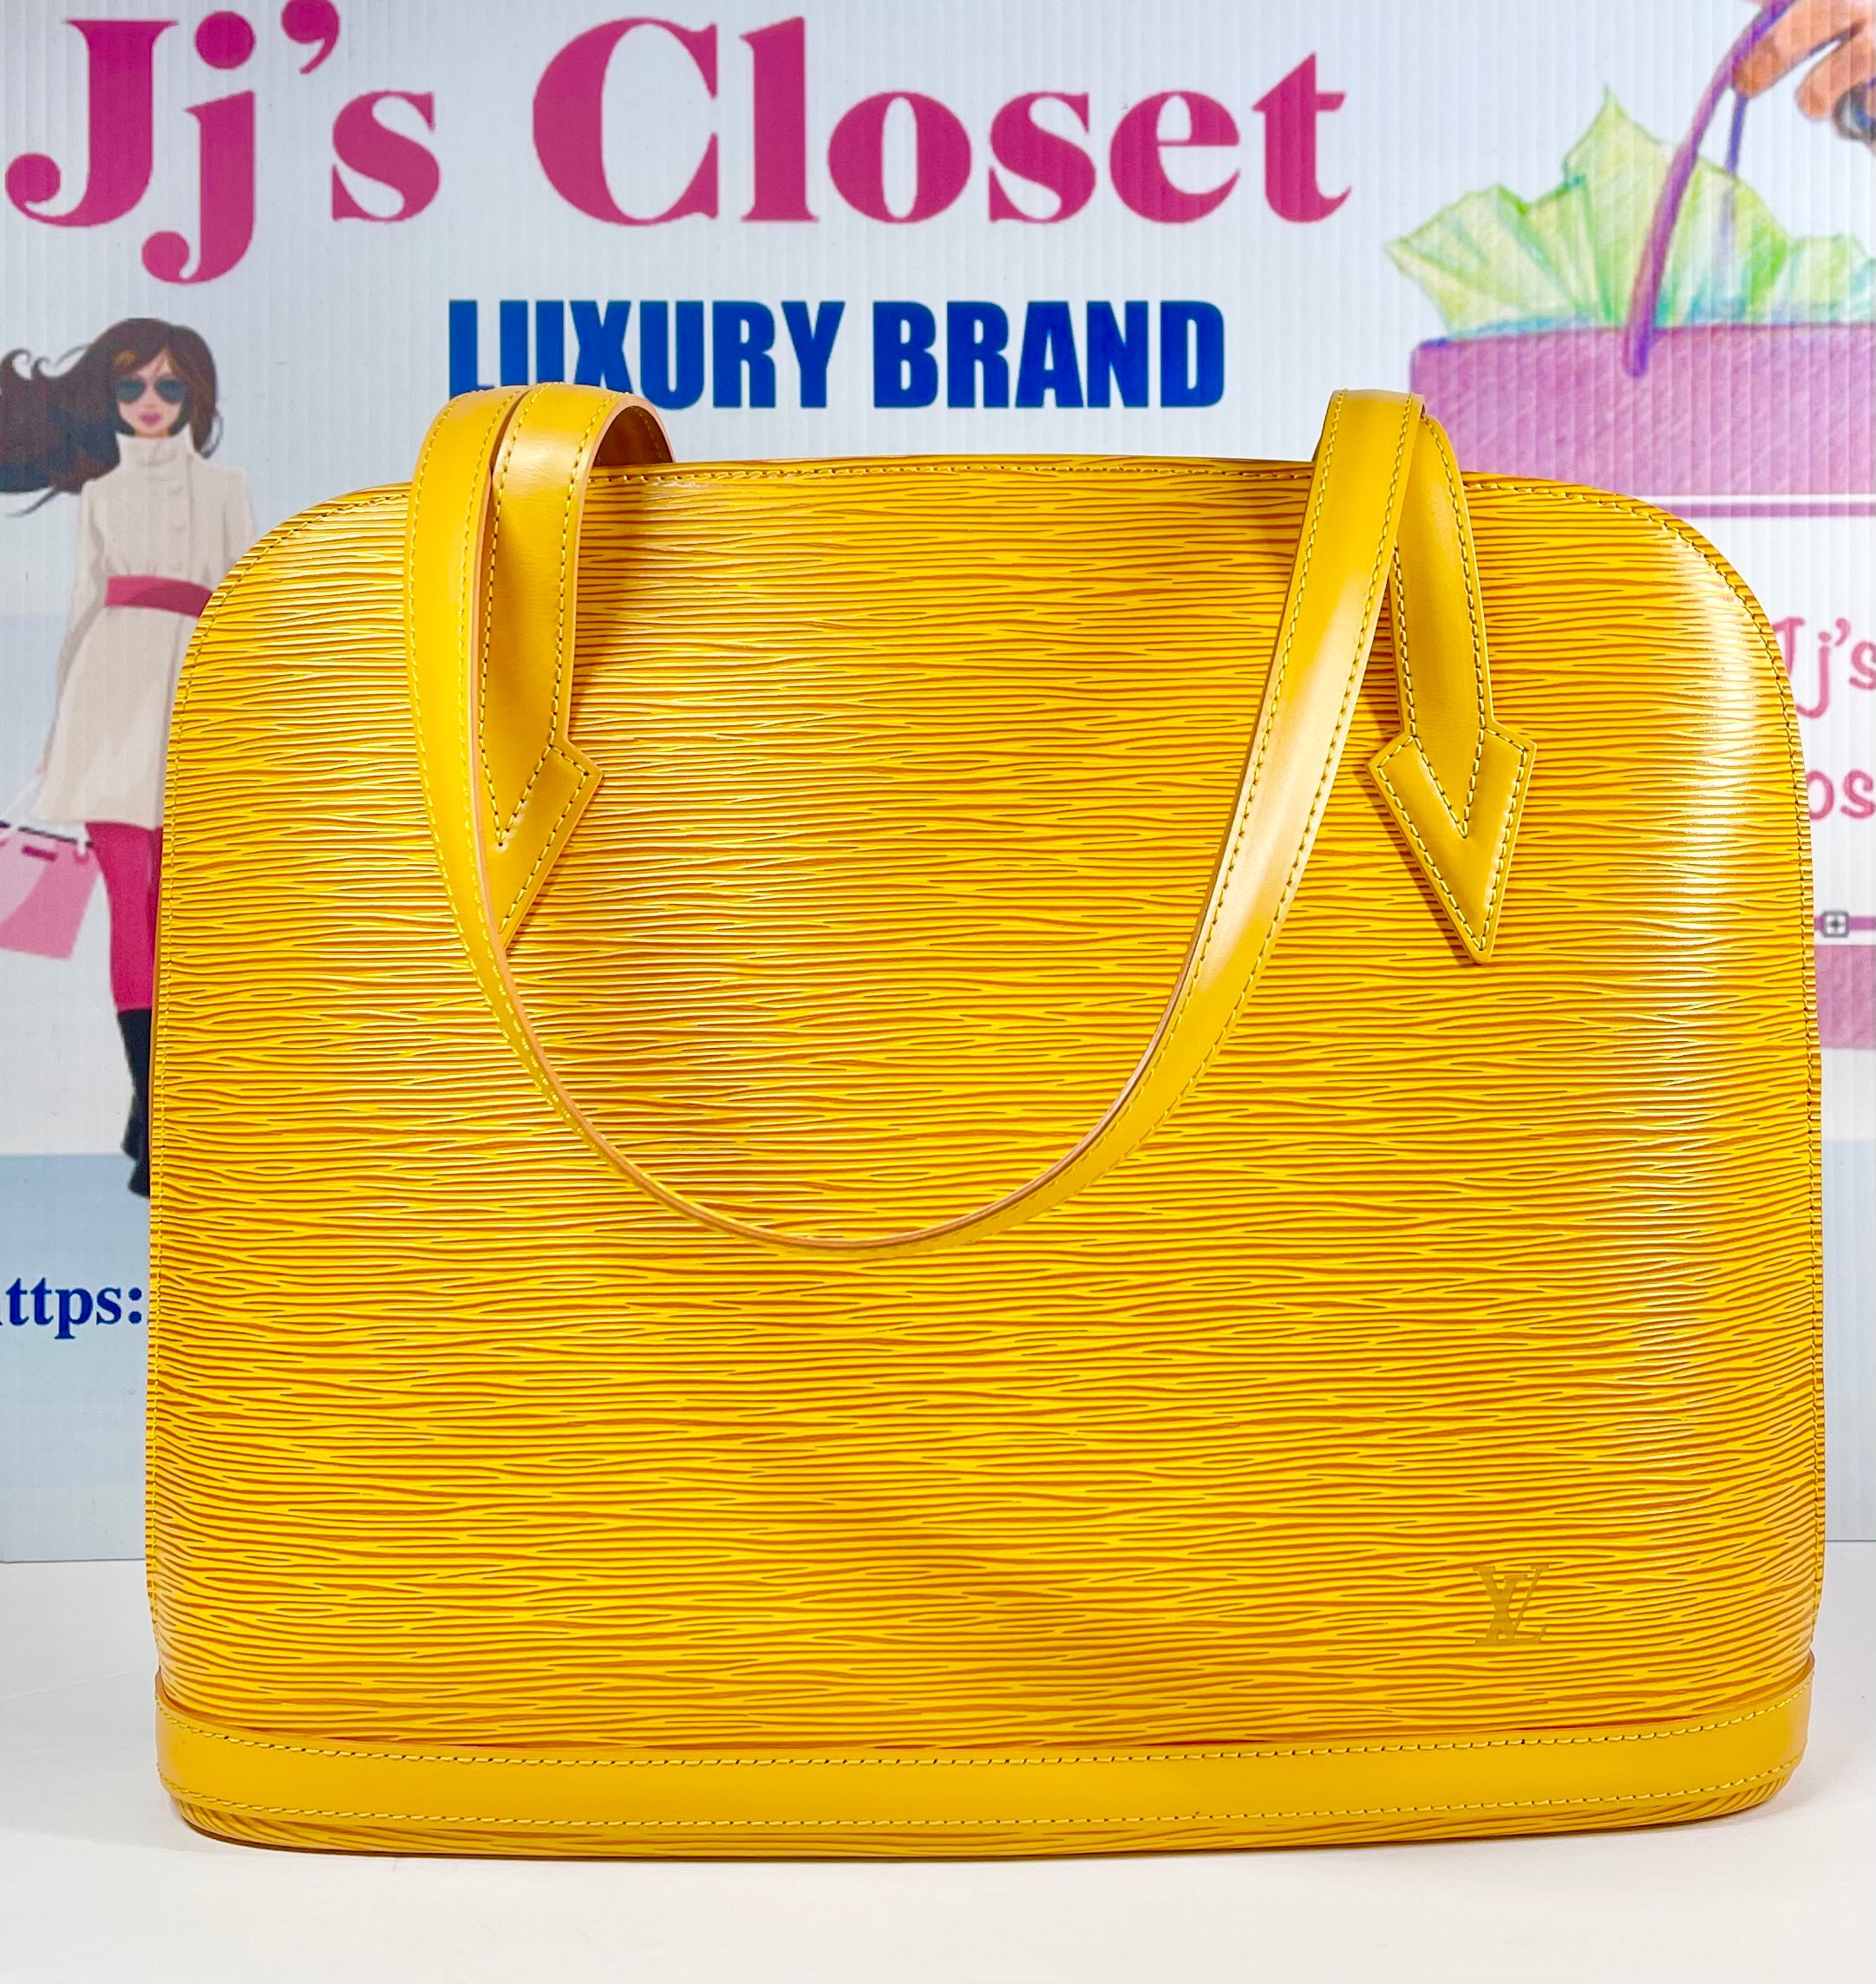 Louis Vuitton - Authenticated Lussac Handbag - Leather Yellow for Women, Good Condition